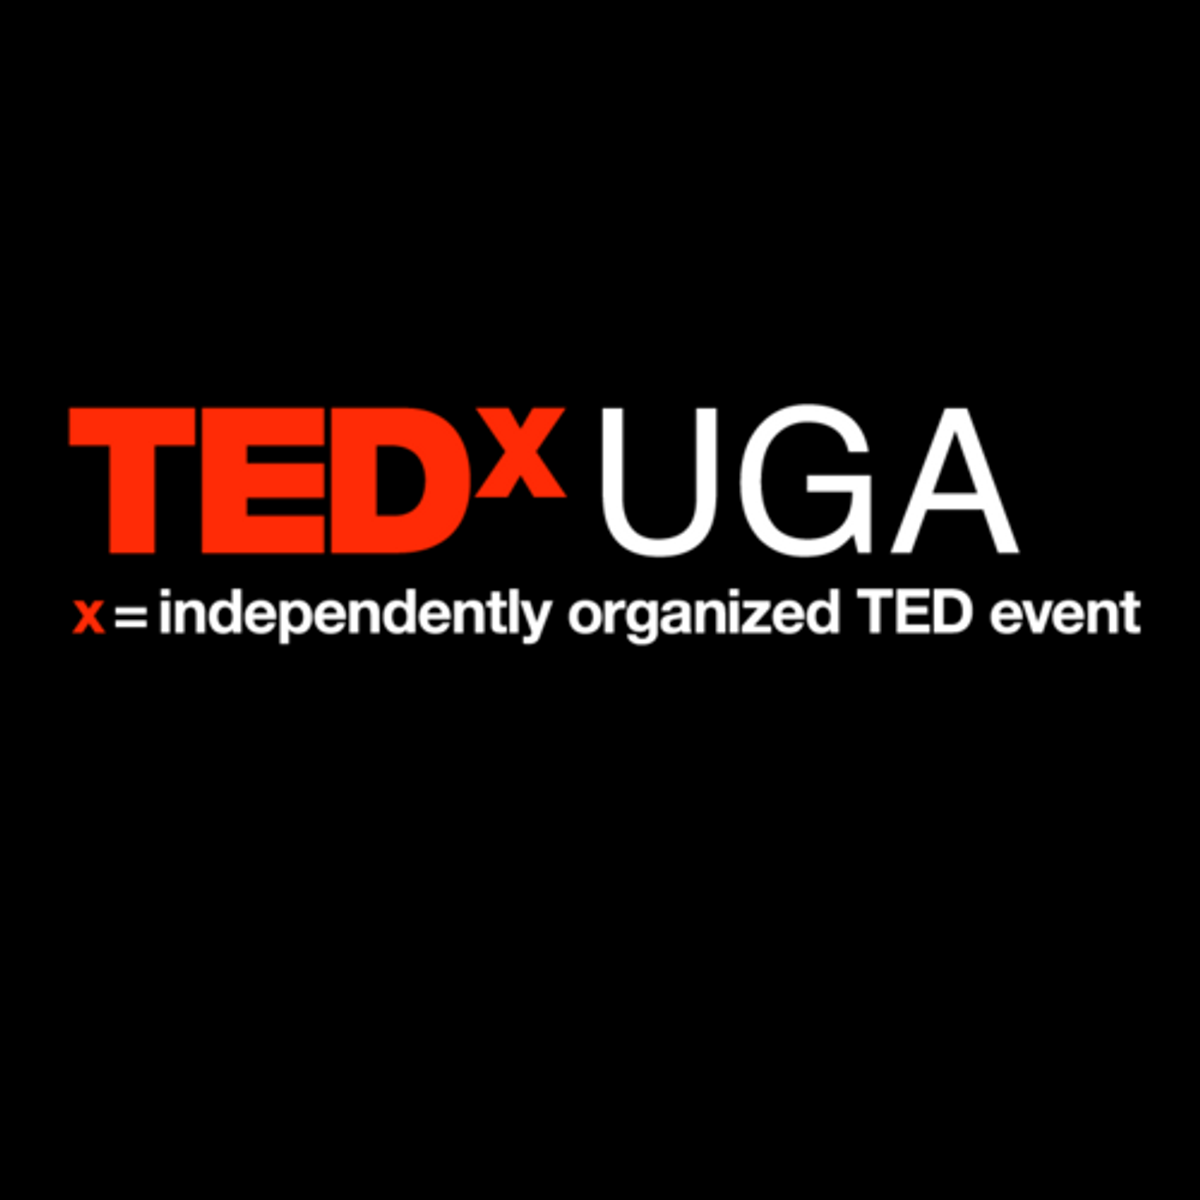 TEDxUGA: How It Added Up